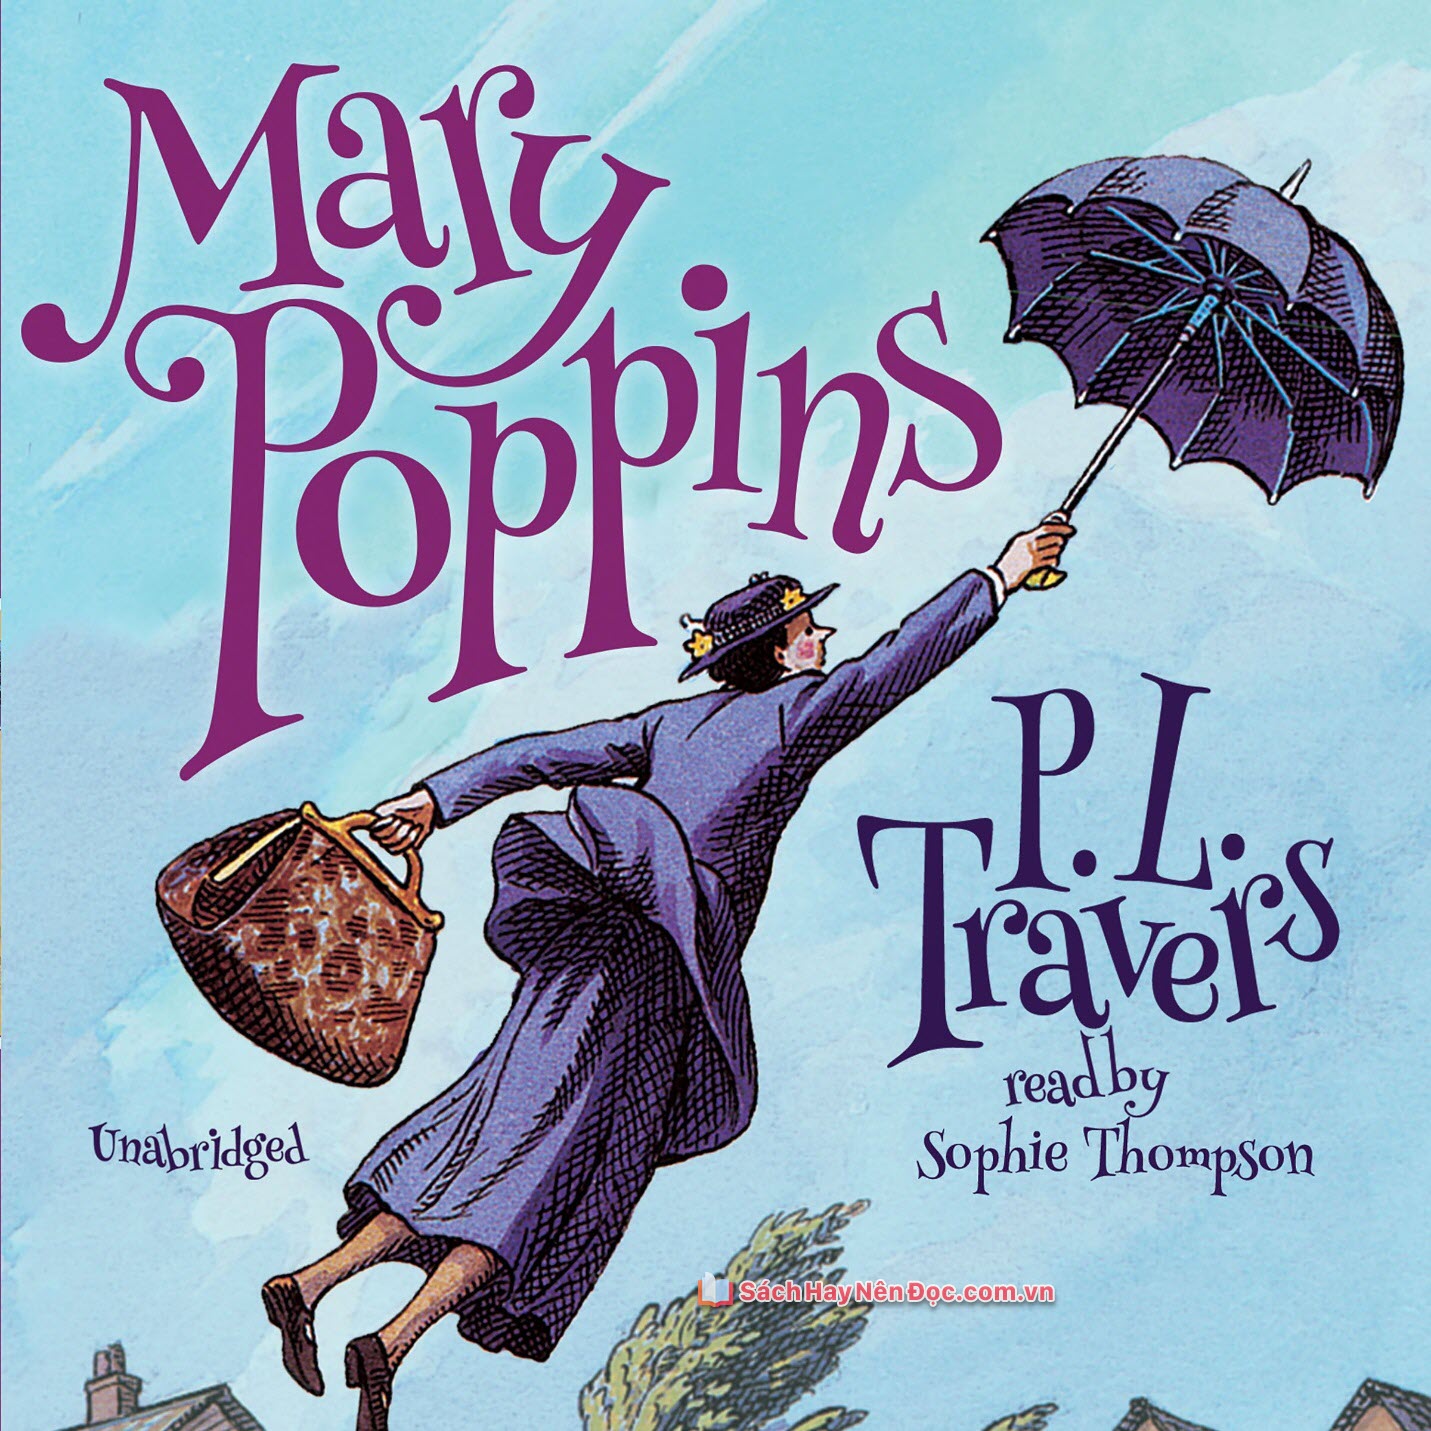 Mary Poppins – P. L. Travers